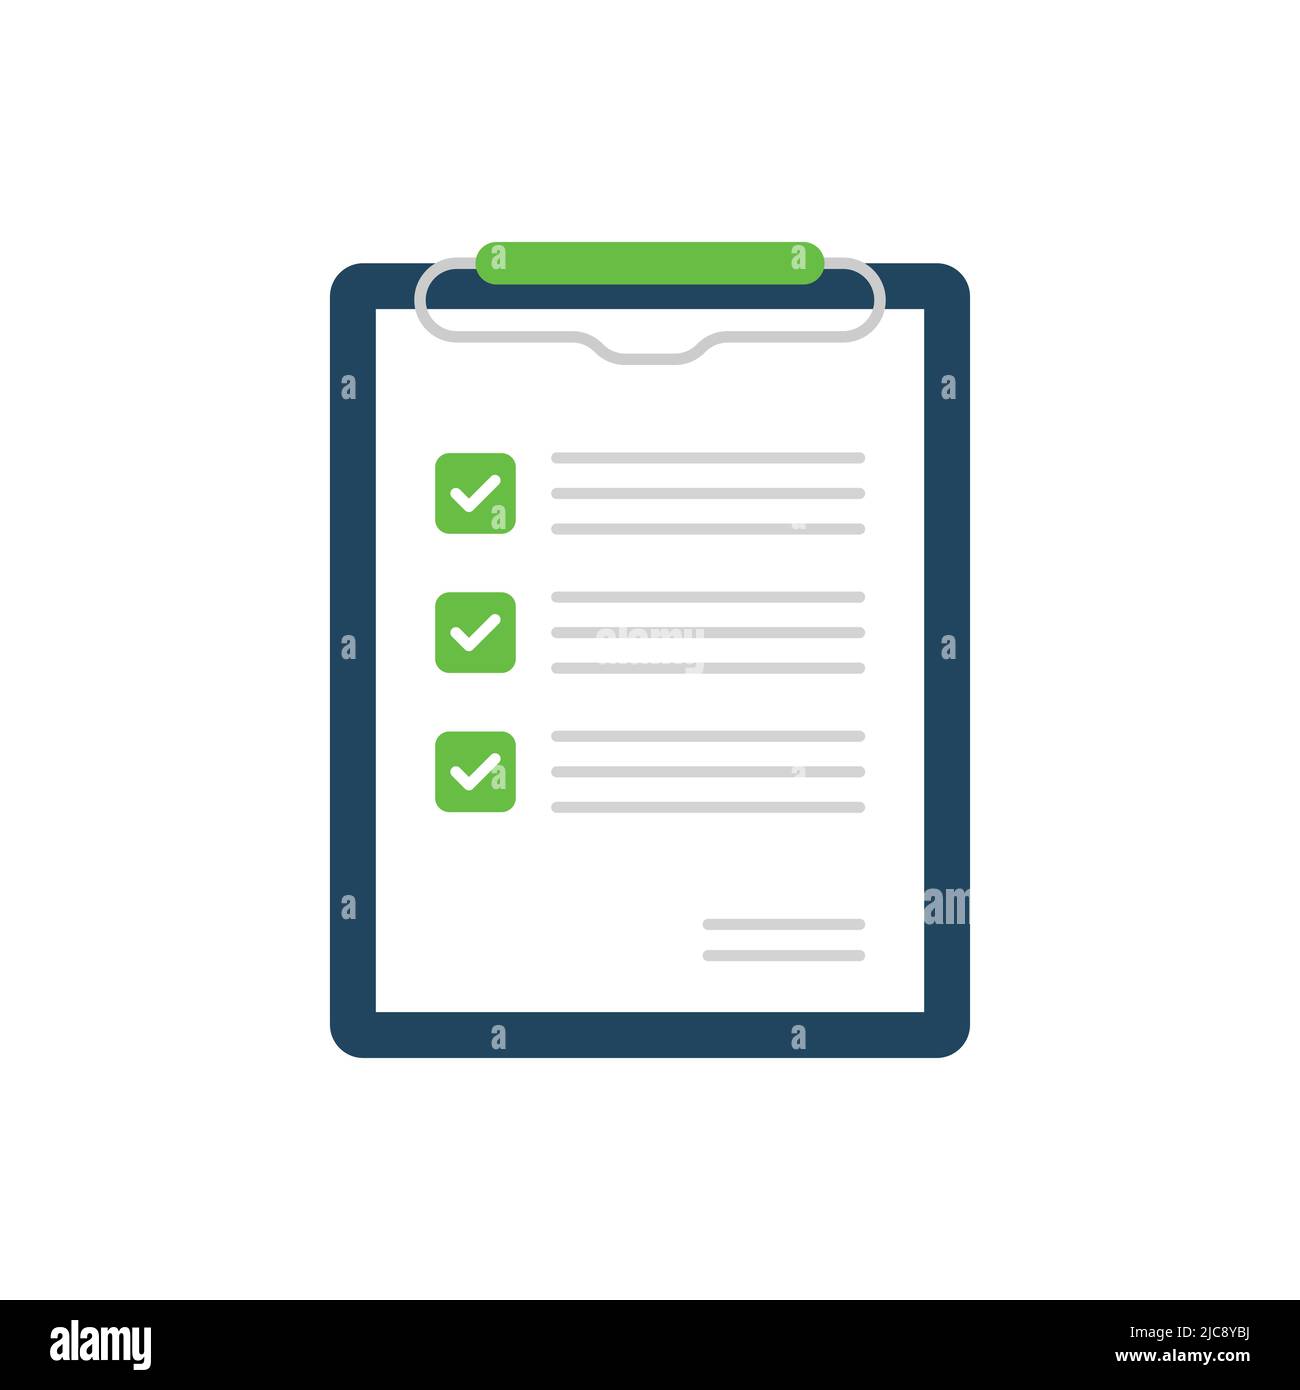 Contract document icon in flat style. Report vector illustration on isolated background. Checklist paper sheet sign business concept. Stock Vector